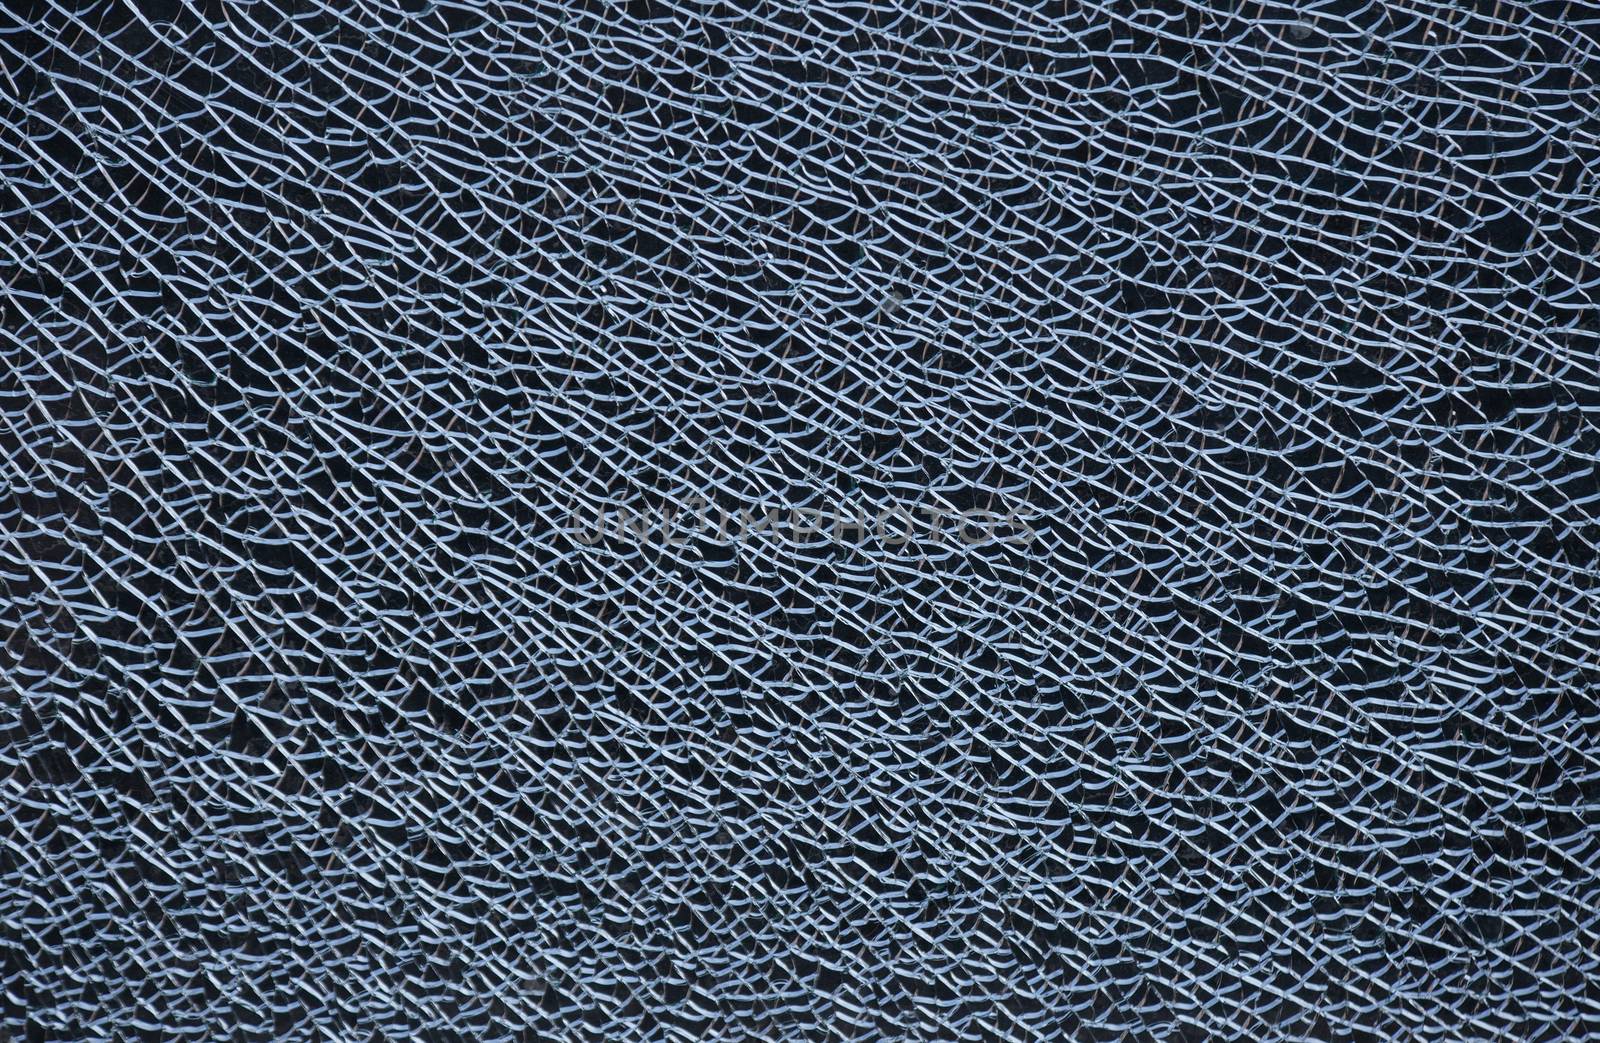 Pattern of a broken glass, useful for background, wrapping or desktop image.